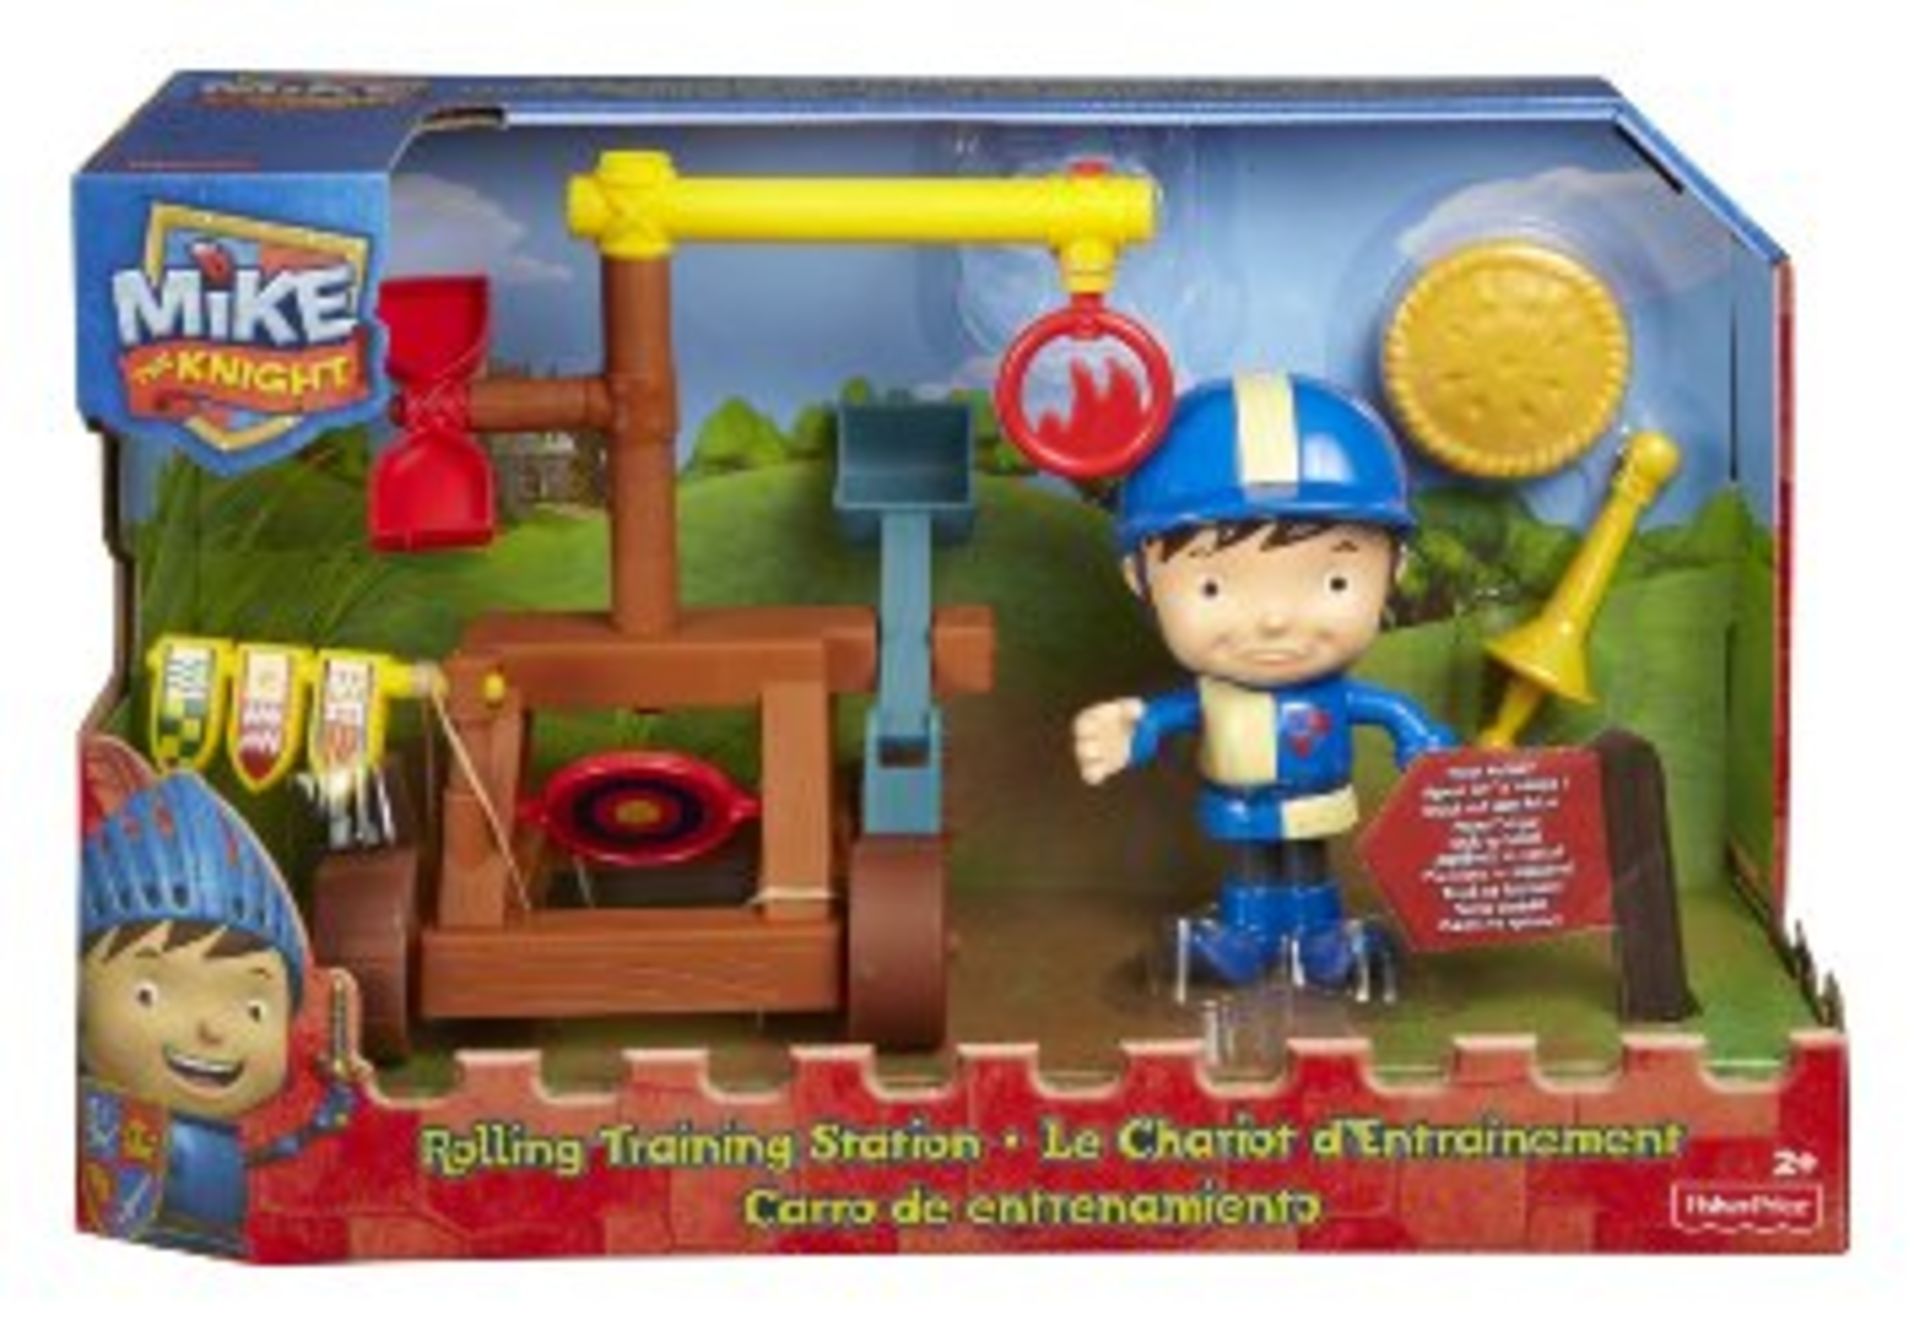 V *TRADE QTY* Grade A Fisher-Price Mike The Knight Rolling Training Station X 3 YOUR BID PRICE TO BE